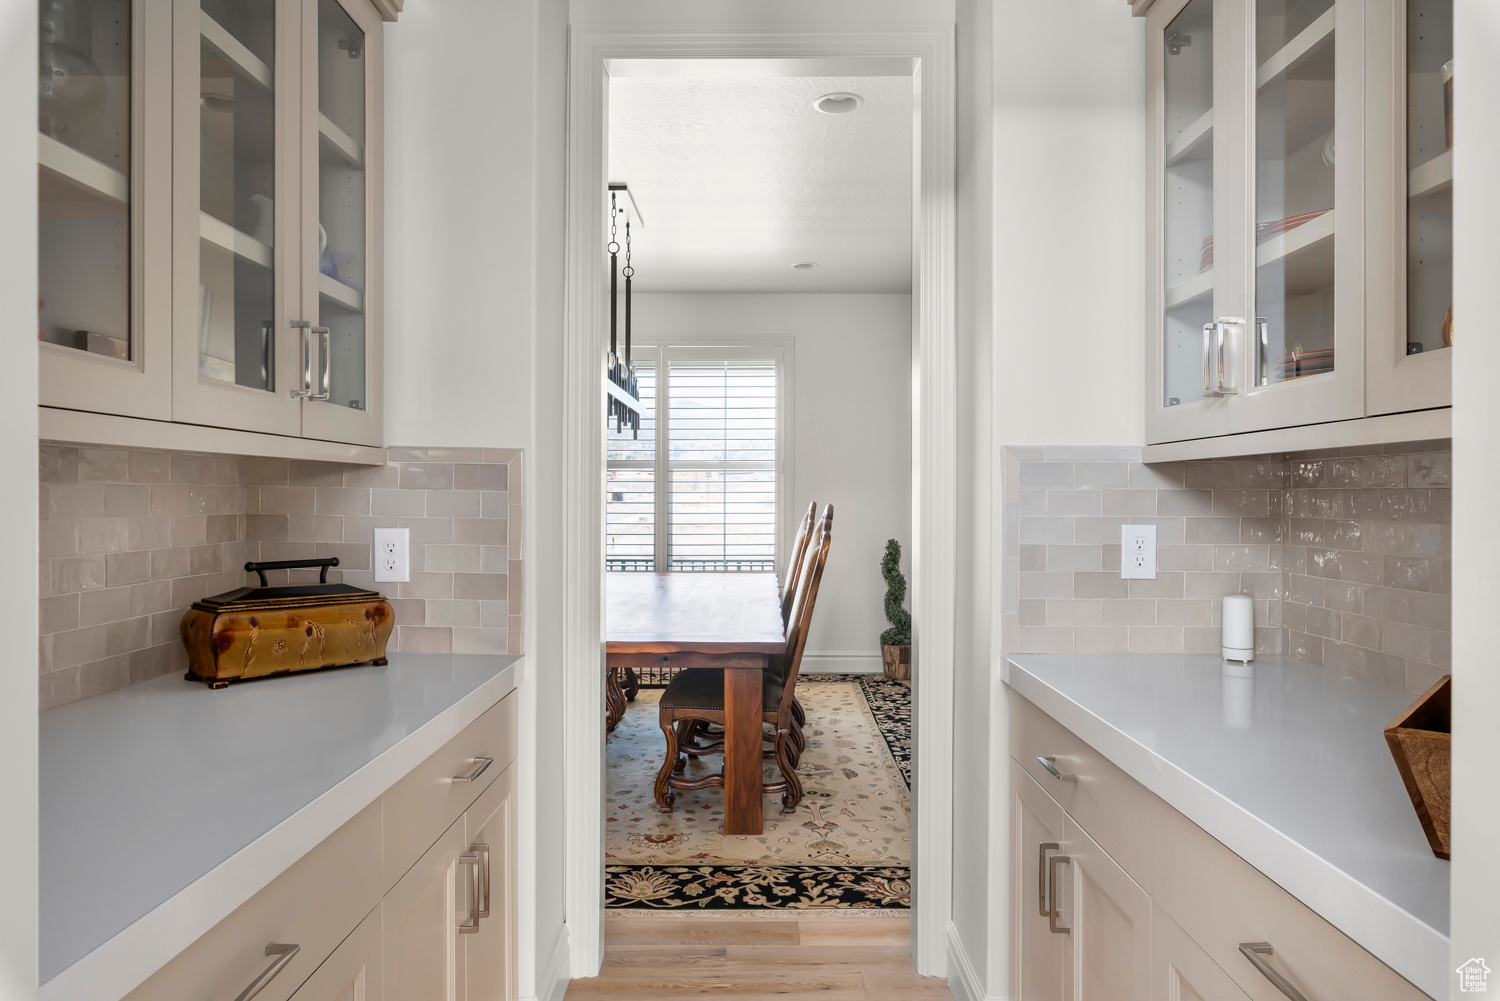 Butler's pantry leading from the kitchen to dining area. tasteful tile, glass front cabinets